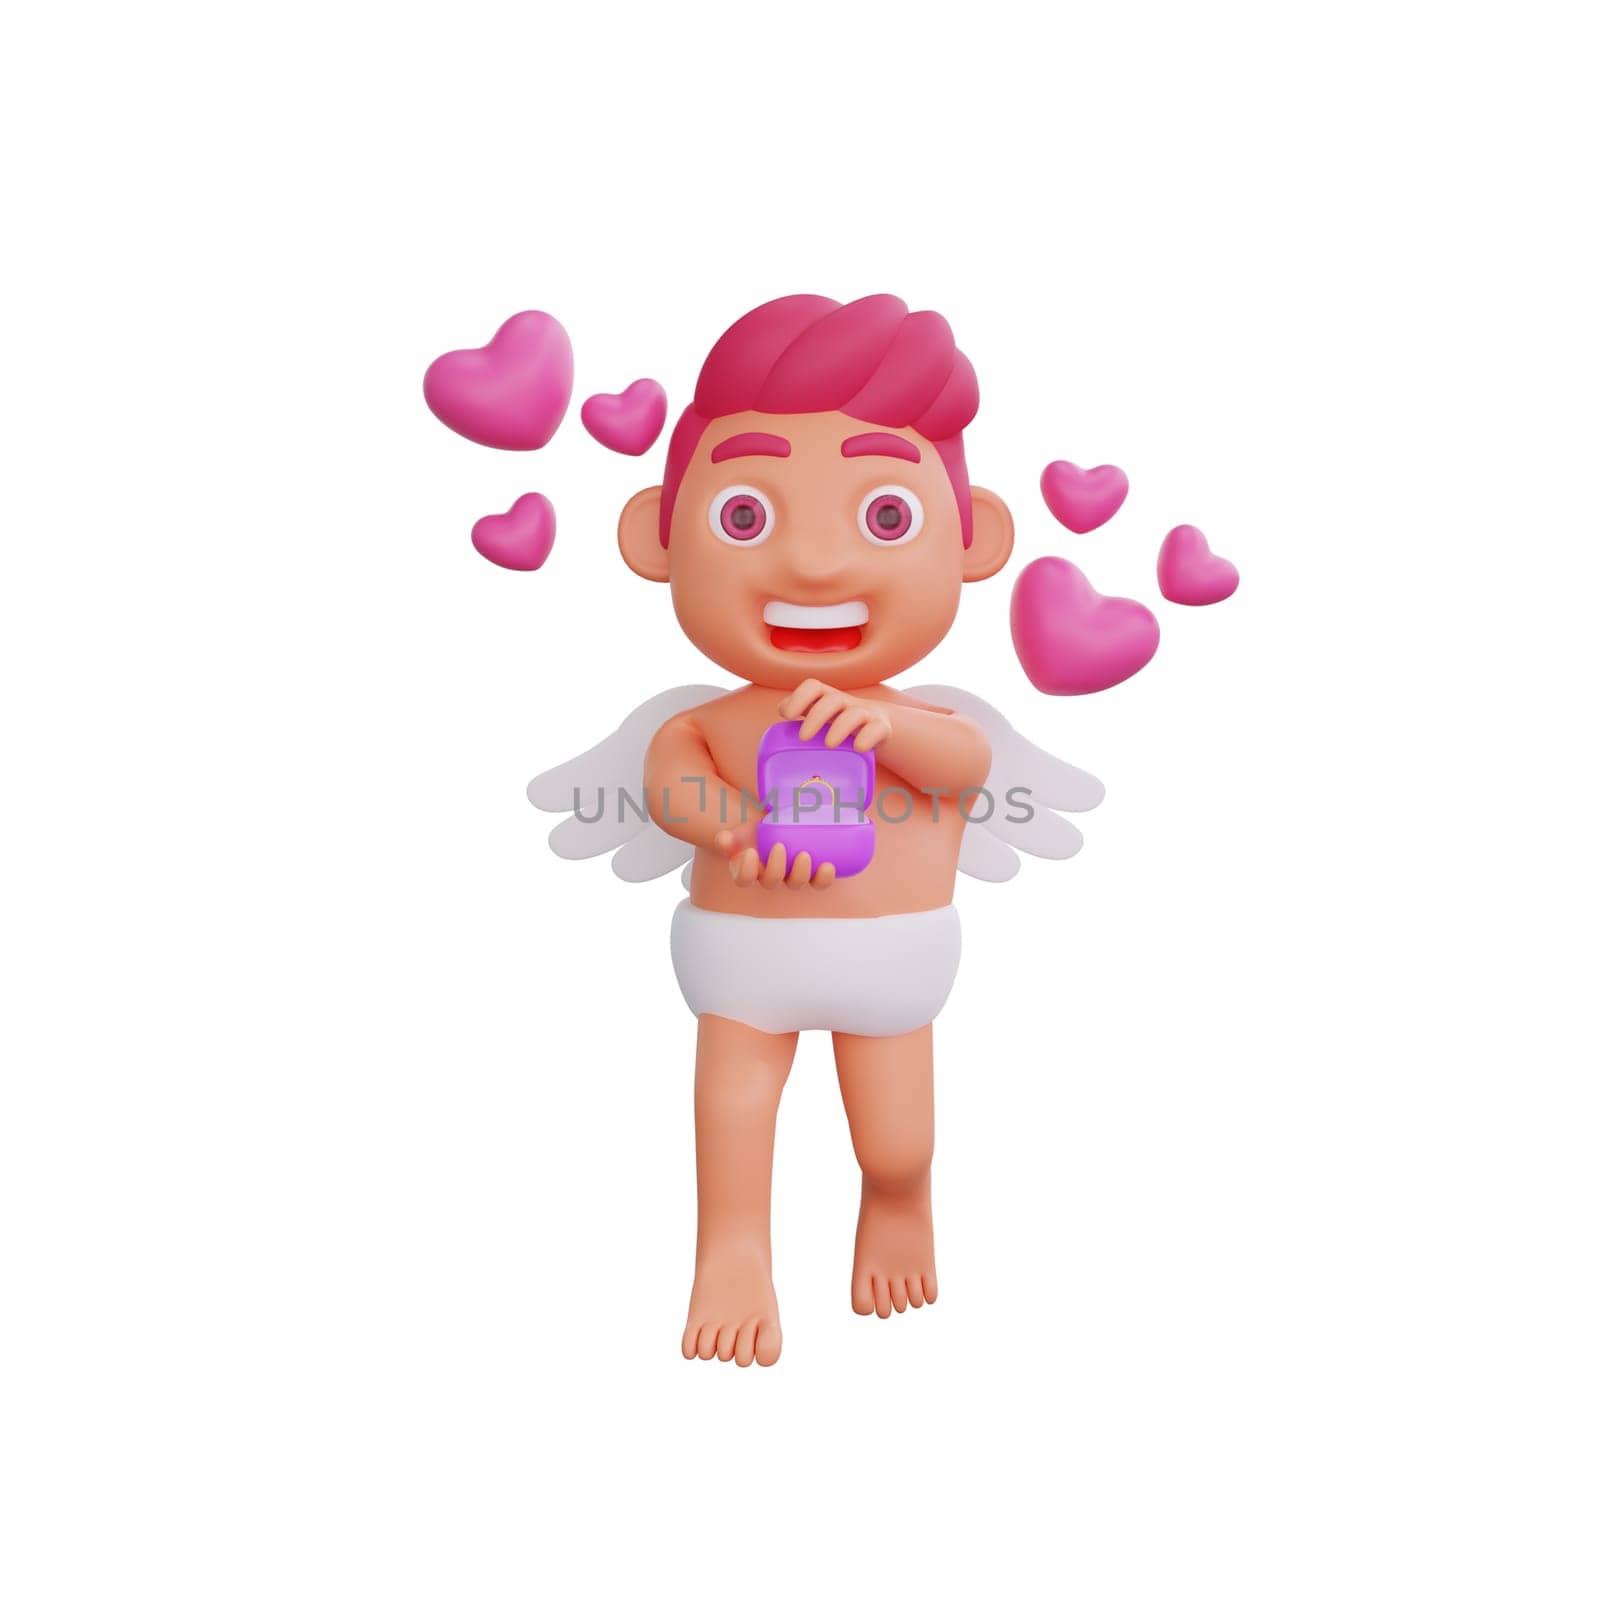 3D illustration of Valentine Cupid character gleefully holding a ring box surrounded by floating hearts, perfect for Valentine or love themed projects